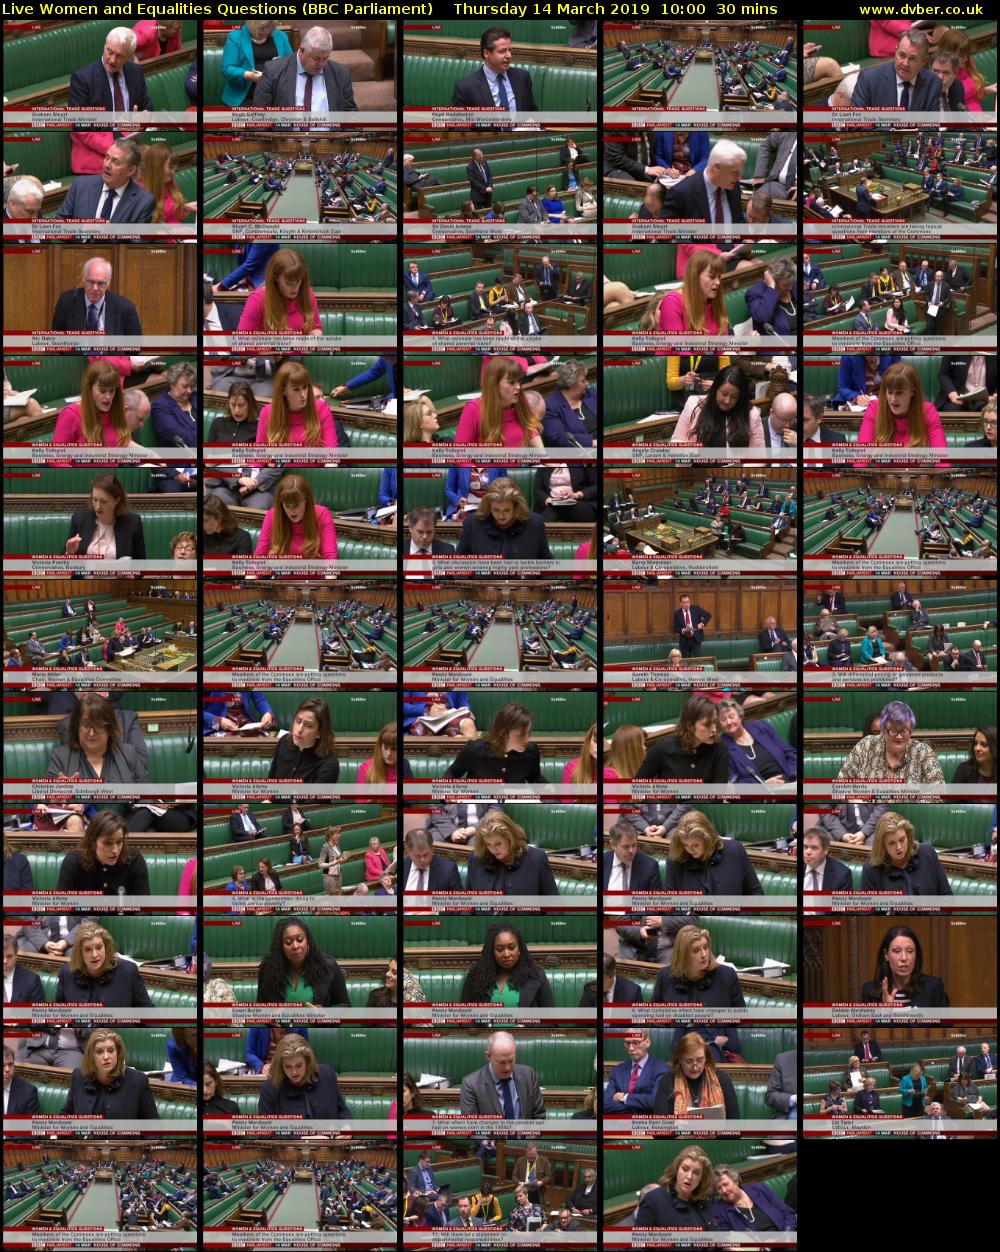 Live Women and Equalities Questions (BBC Parliament) Thursday 14 March 2019 10:00 - 10:30